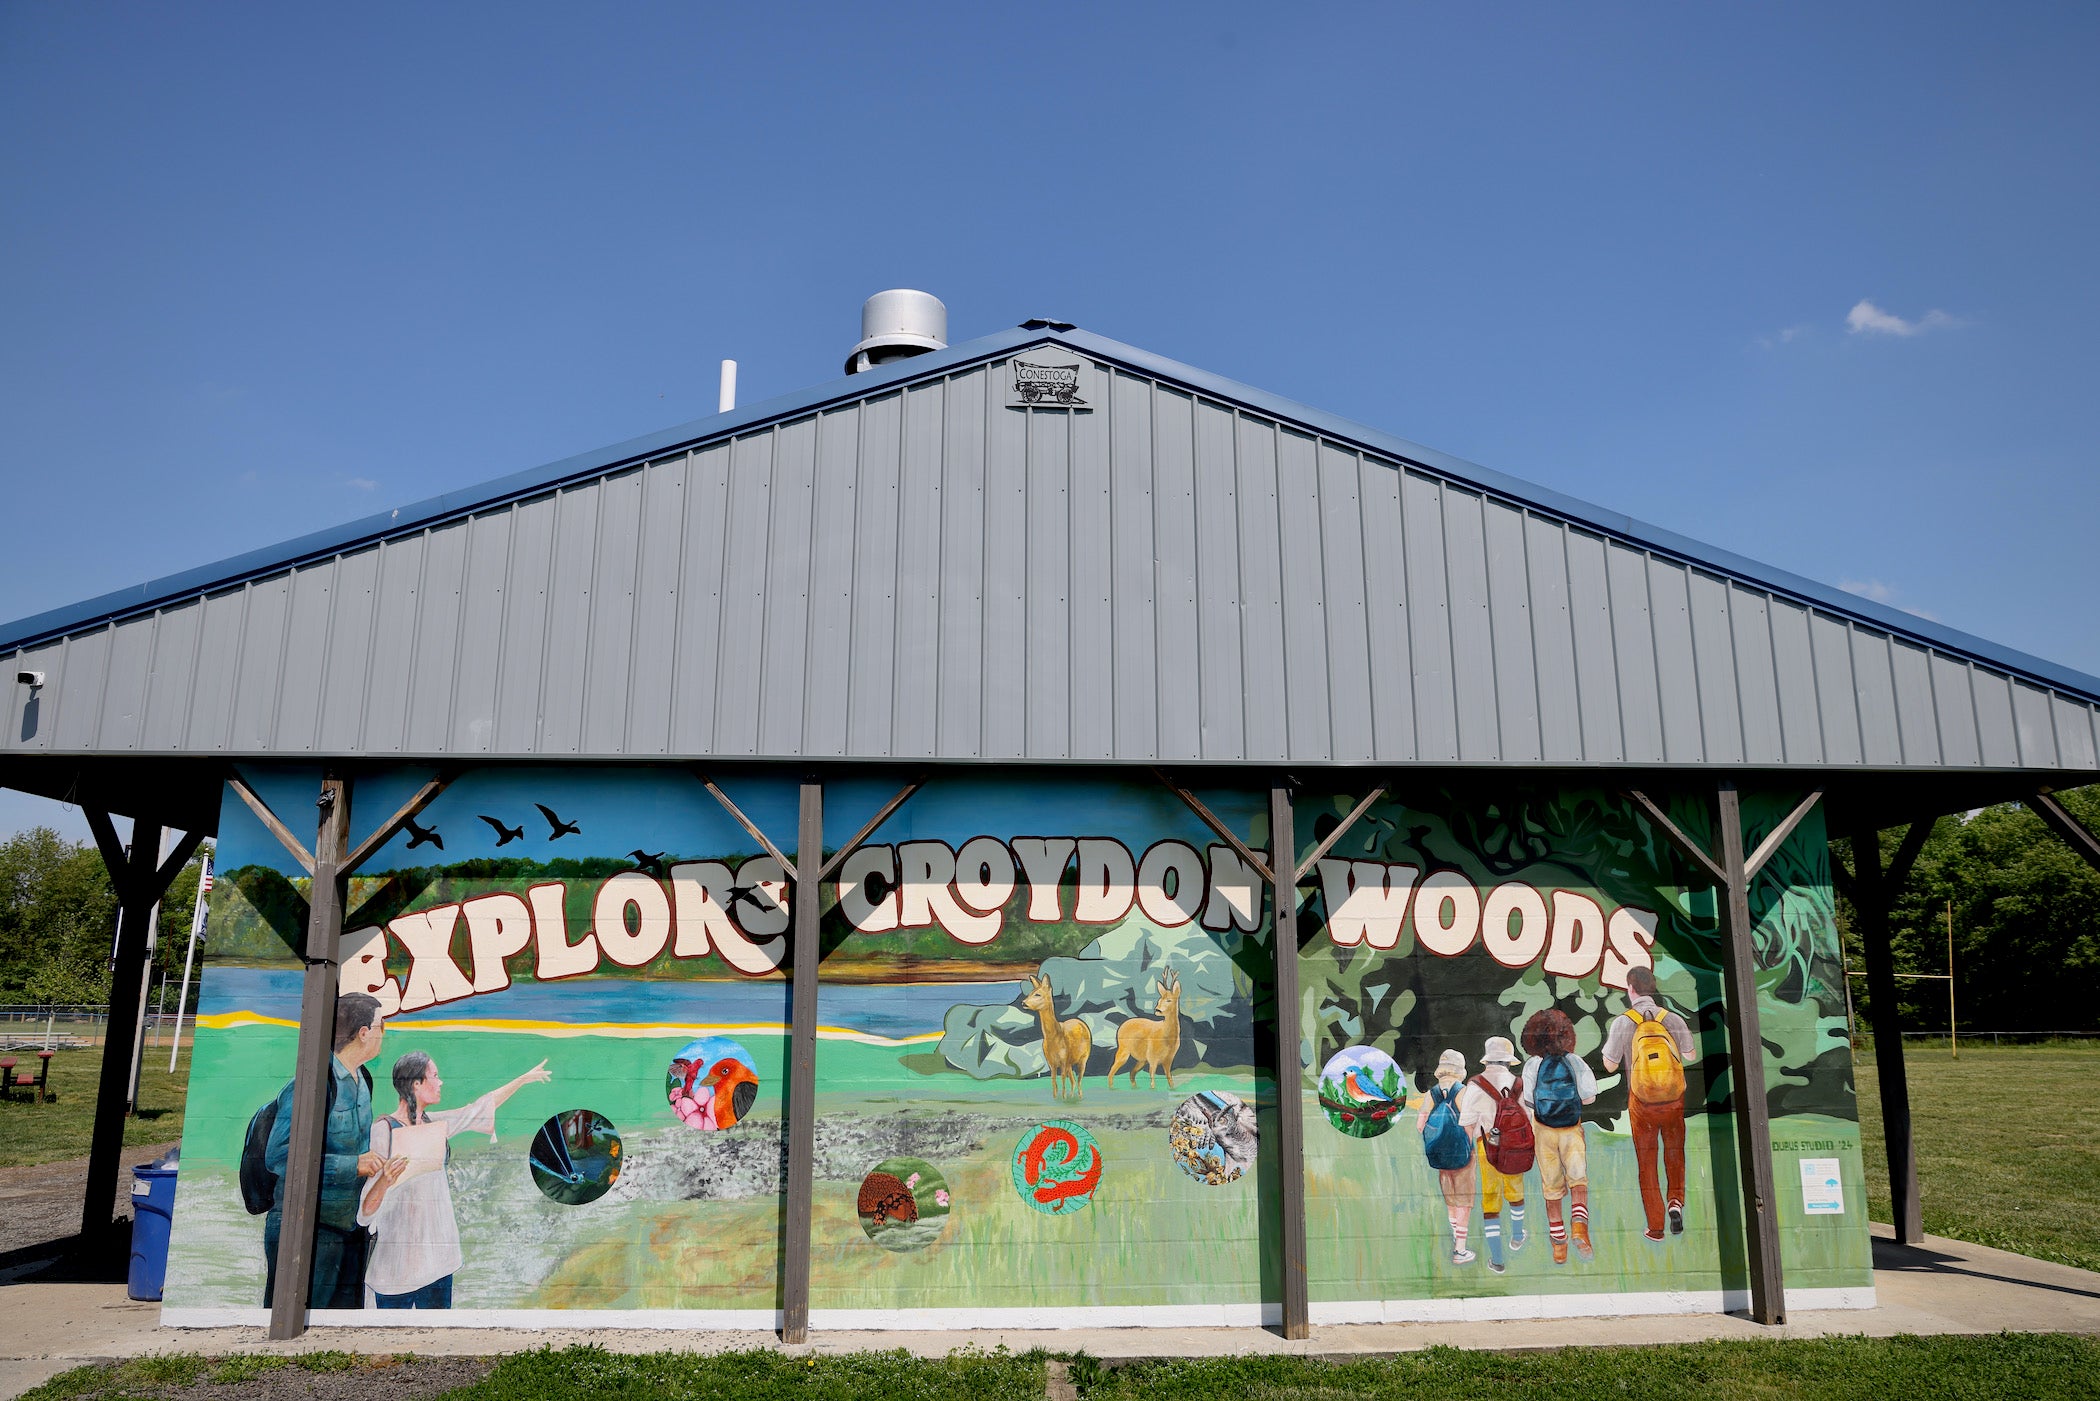 Croydon Woods has earned awards for environmental stewardship. It's a toxic Superfund site